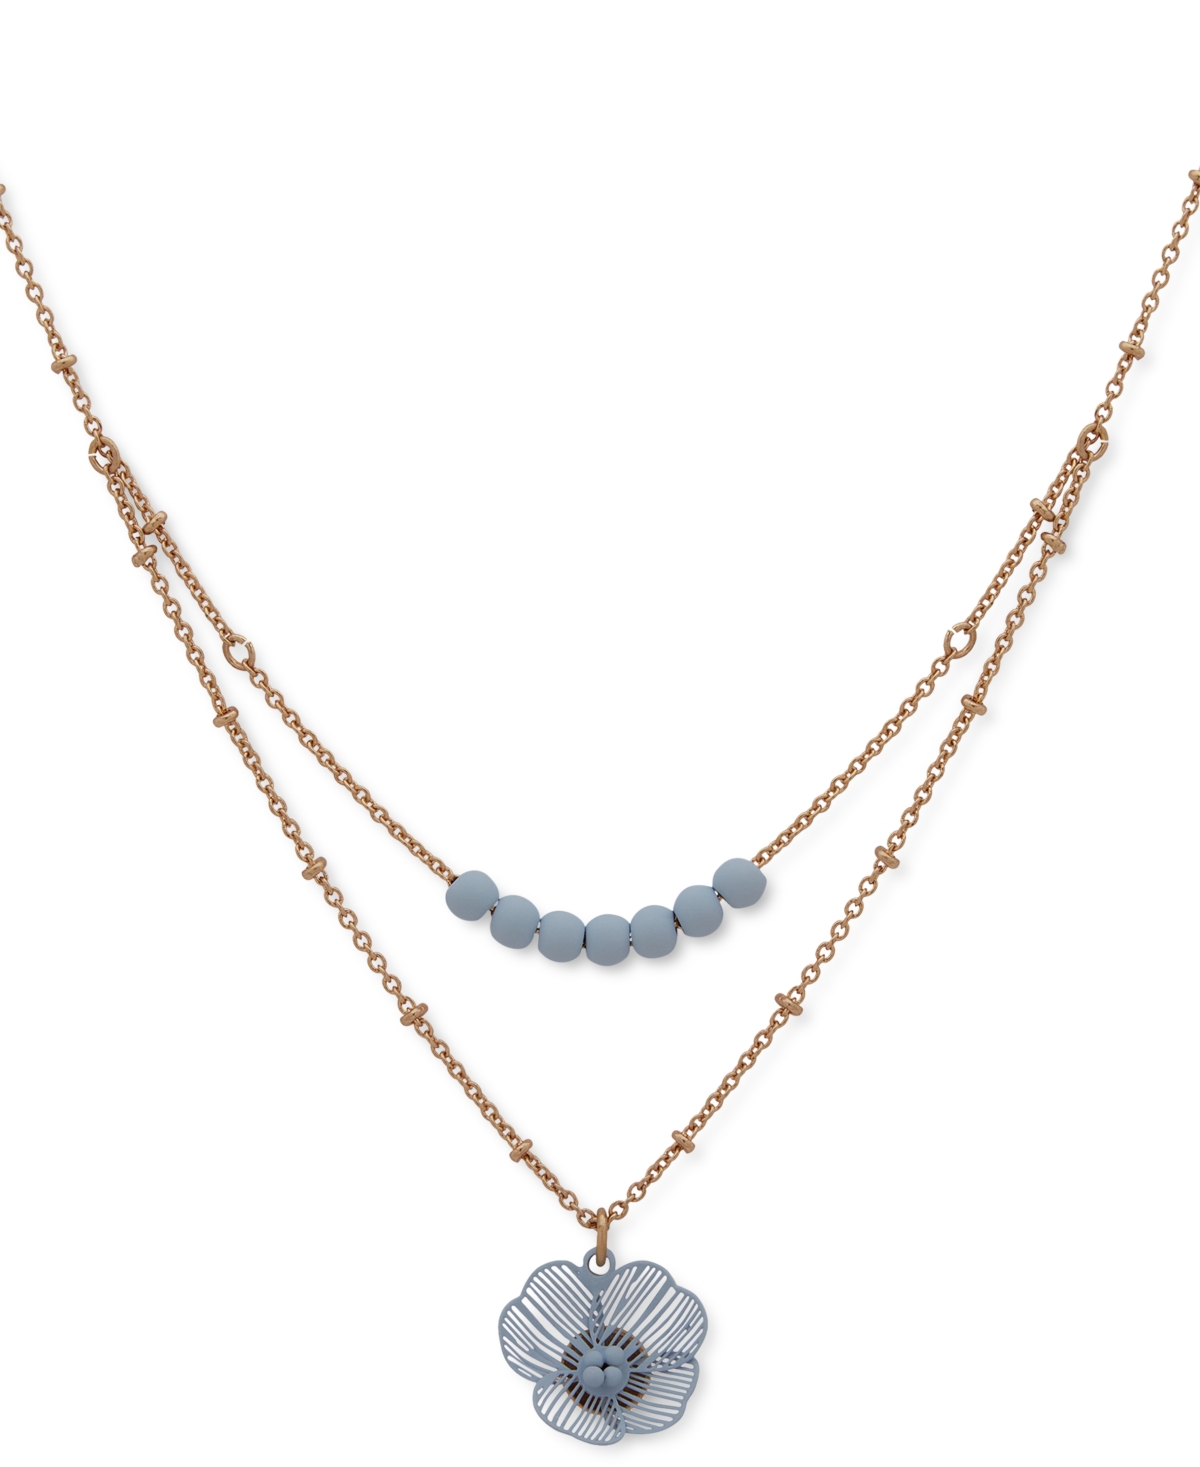 Lonna & Lilly Gold-tone Color Artistic Flower Beaded Layered Pendant Necklace, 16" + 3" Extender In Blue